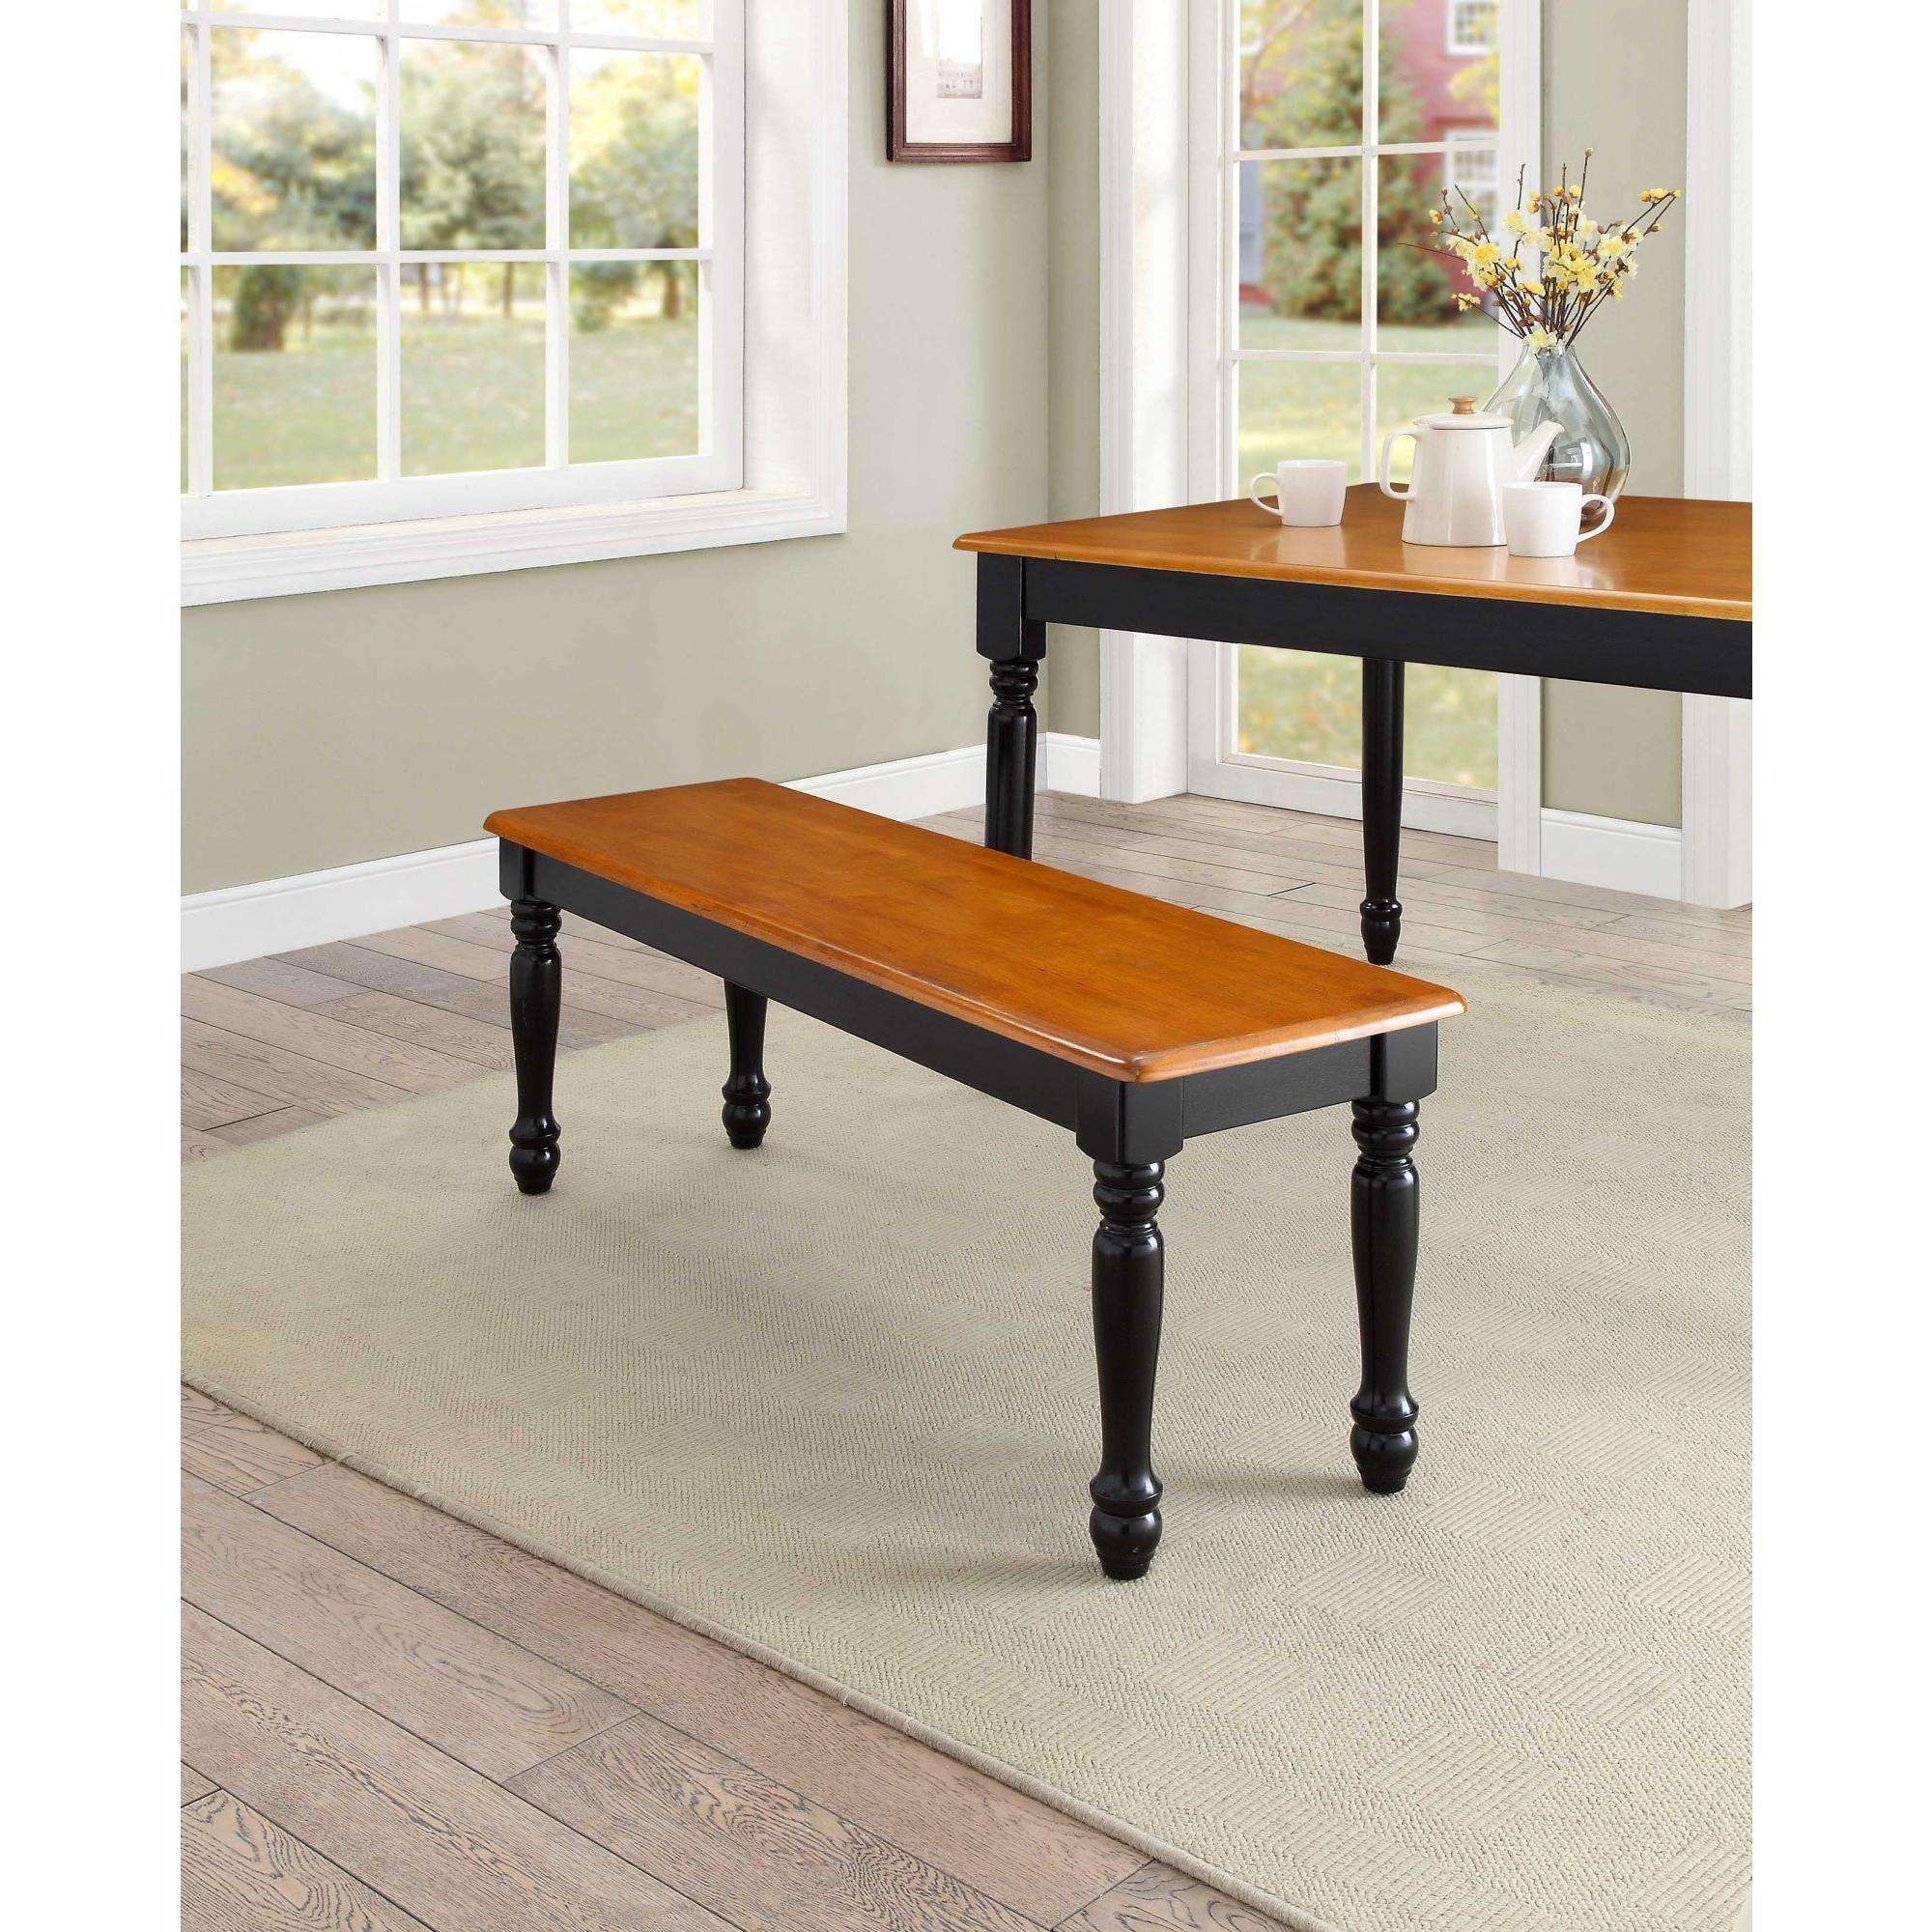 Weathered Gray 47 L x 14 D x 18 H Knocbel Antique Dining Bench with Wooden Apron and Turned Legs